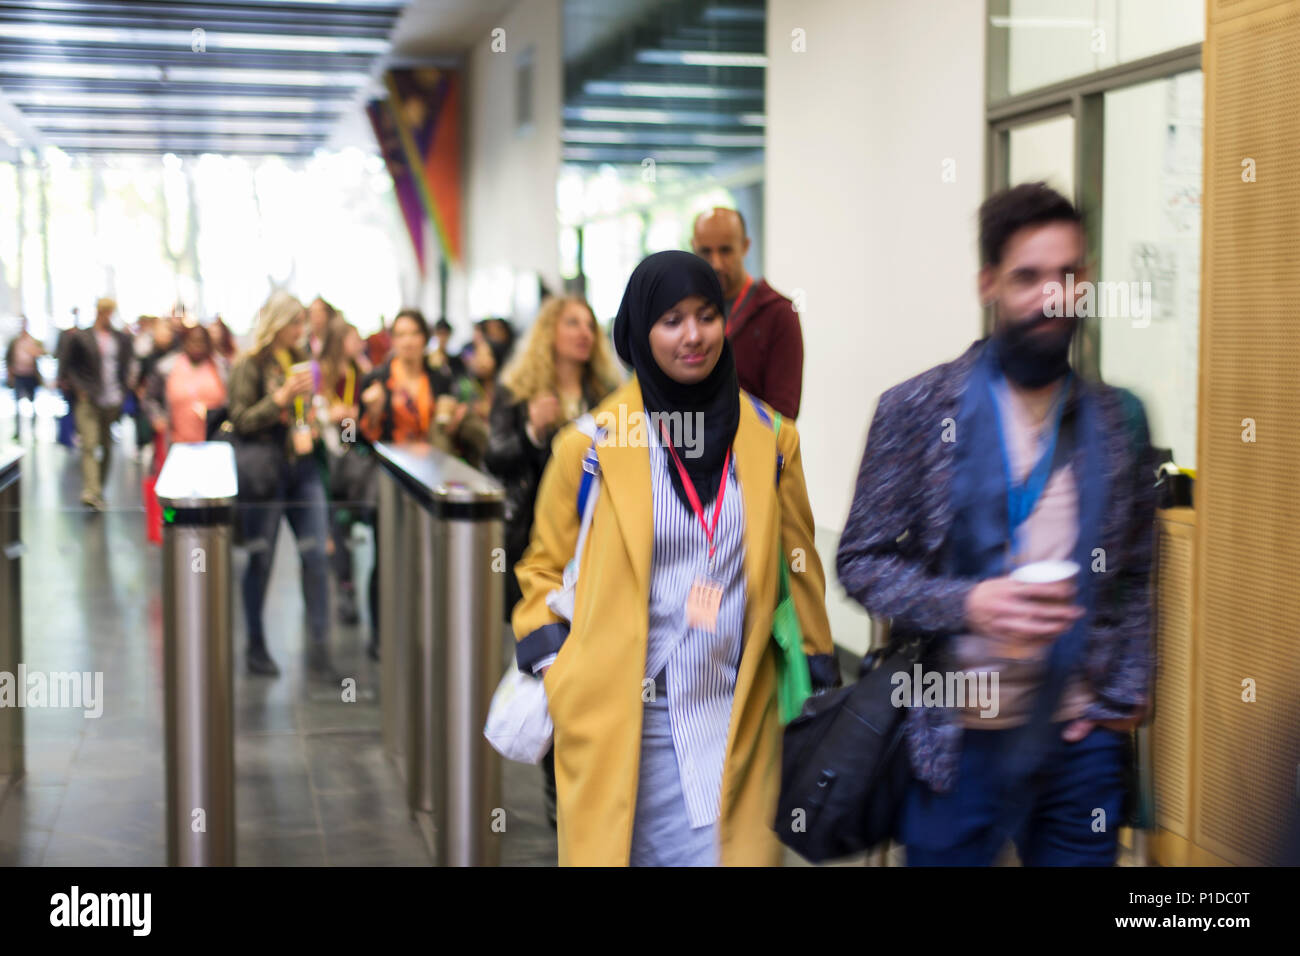 People arriving, entering turnstile at conference Stock Photo